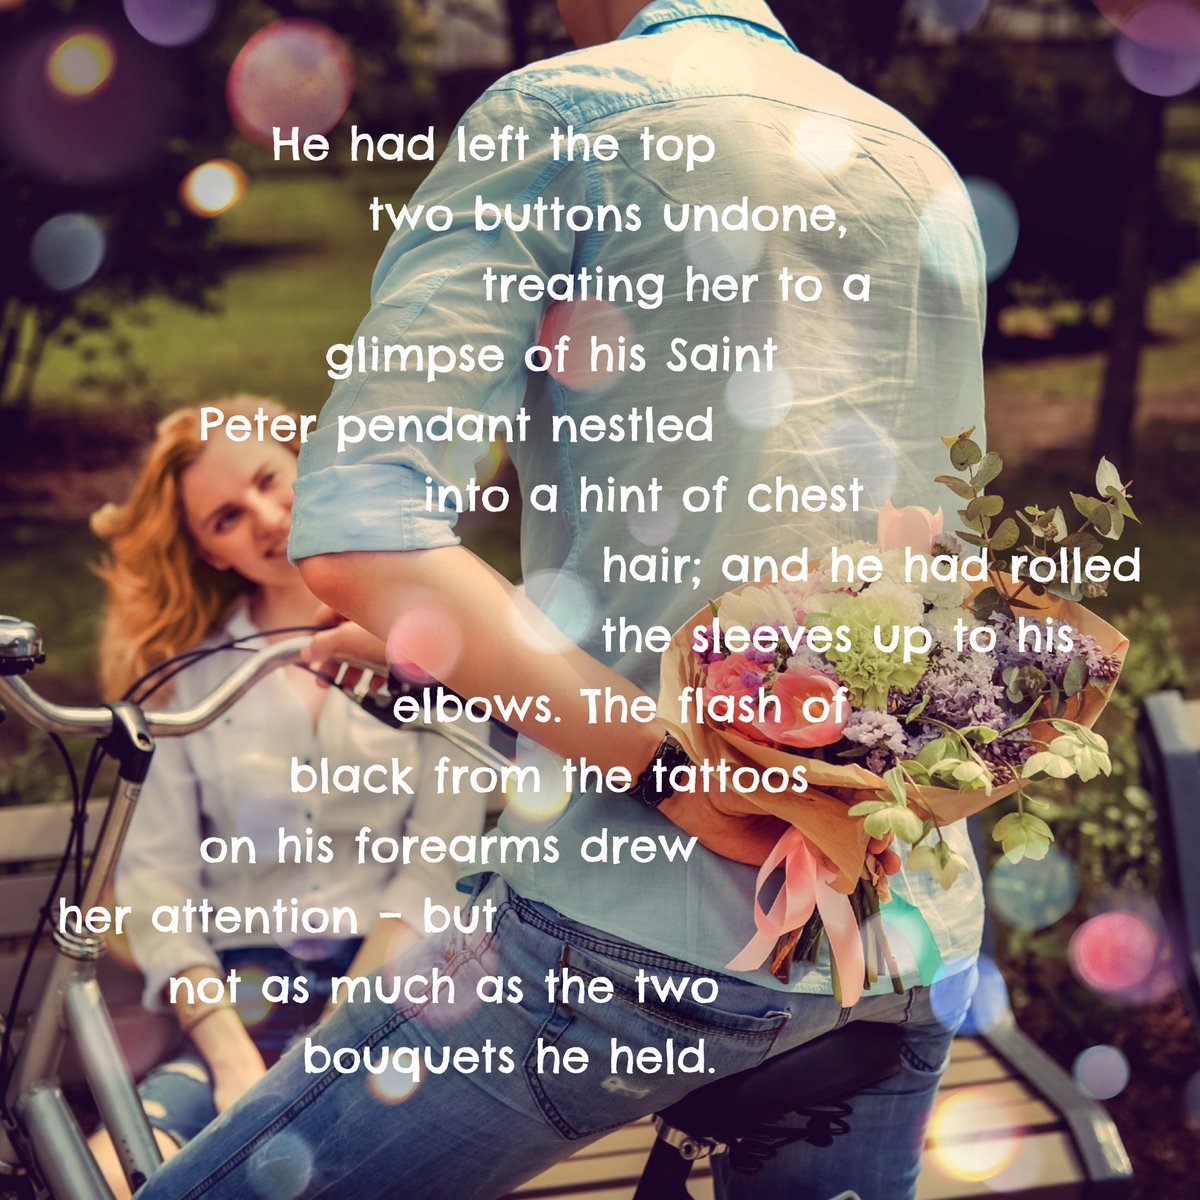 #FridayKiss from THE HOLD, my upcoming sequel to The Catch. The #WordPrompt is FLASH. 📸
.
#amwriting #workinprogress #romancereaders  #romancebook  #romancenovel #contemporaryromance #contemporaryromancereads #romancebookaddict #ireadromance #readromance  #wip #romancereader